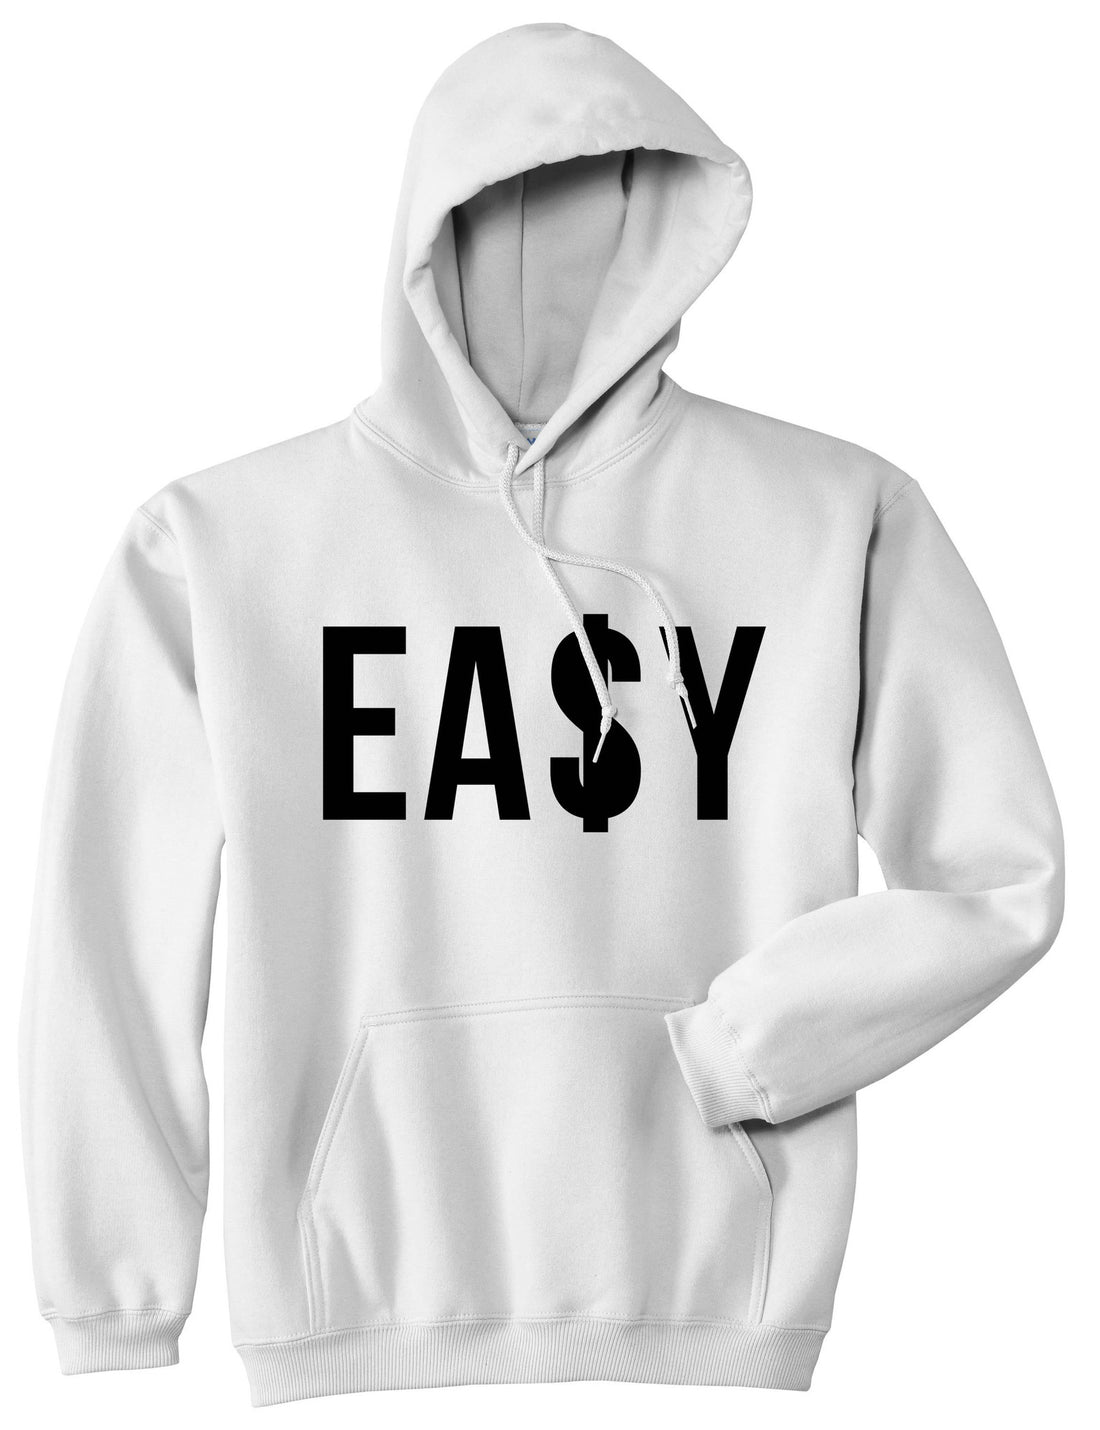 Easy Money Big High Dope Cool Black by Kings Of NY Boys Kids Pullover Hoodie Hoody in White by Kings Of NY